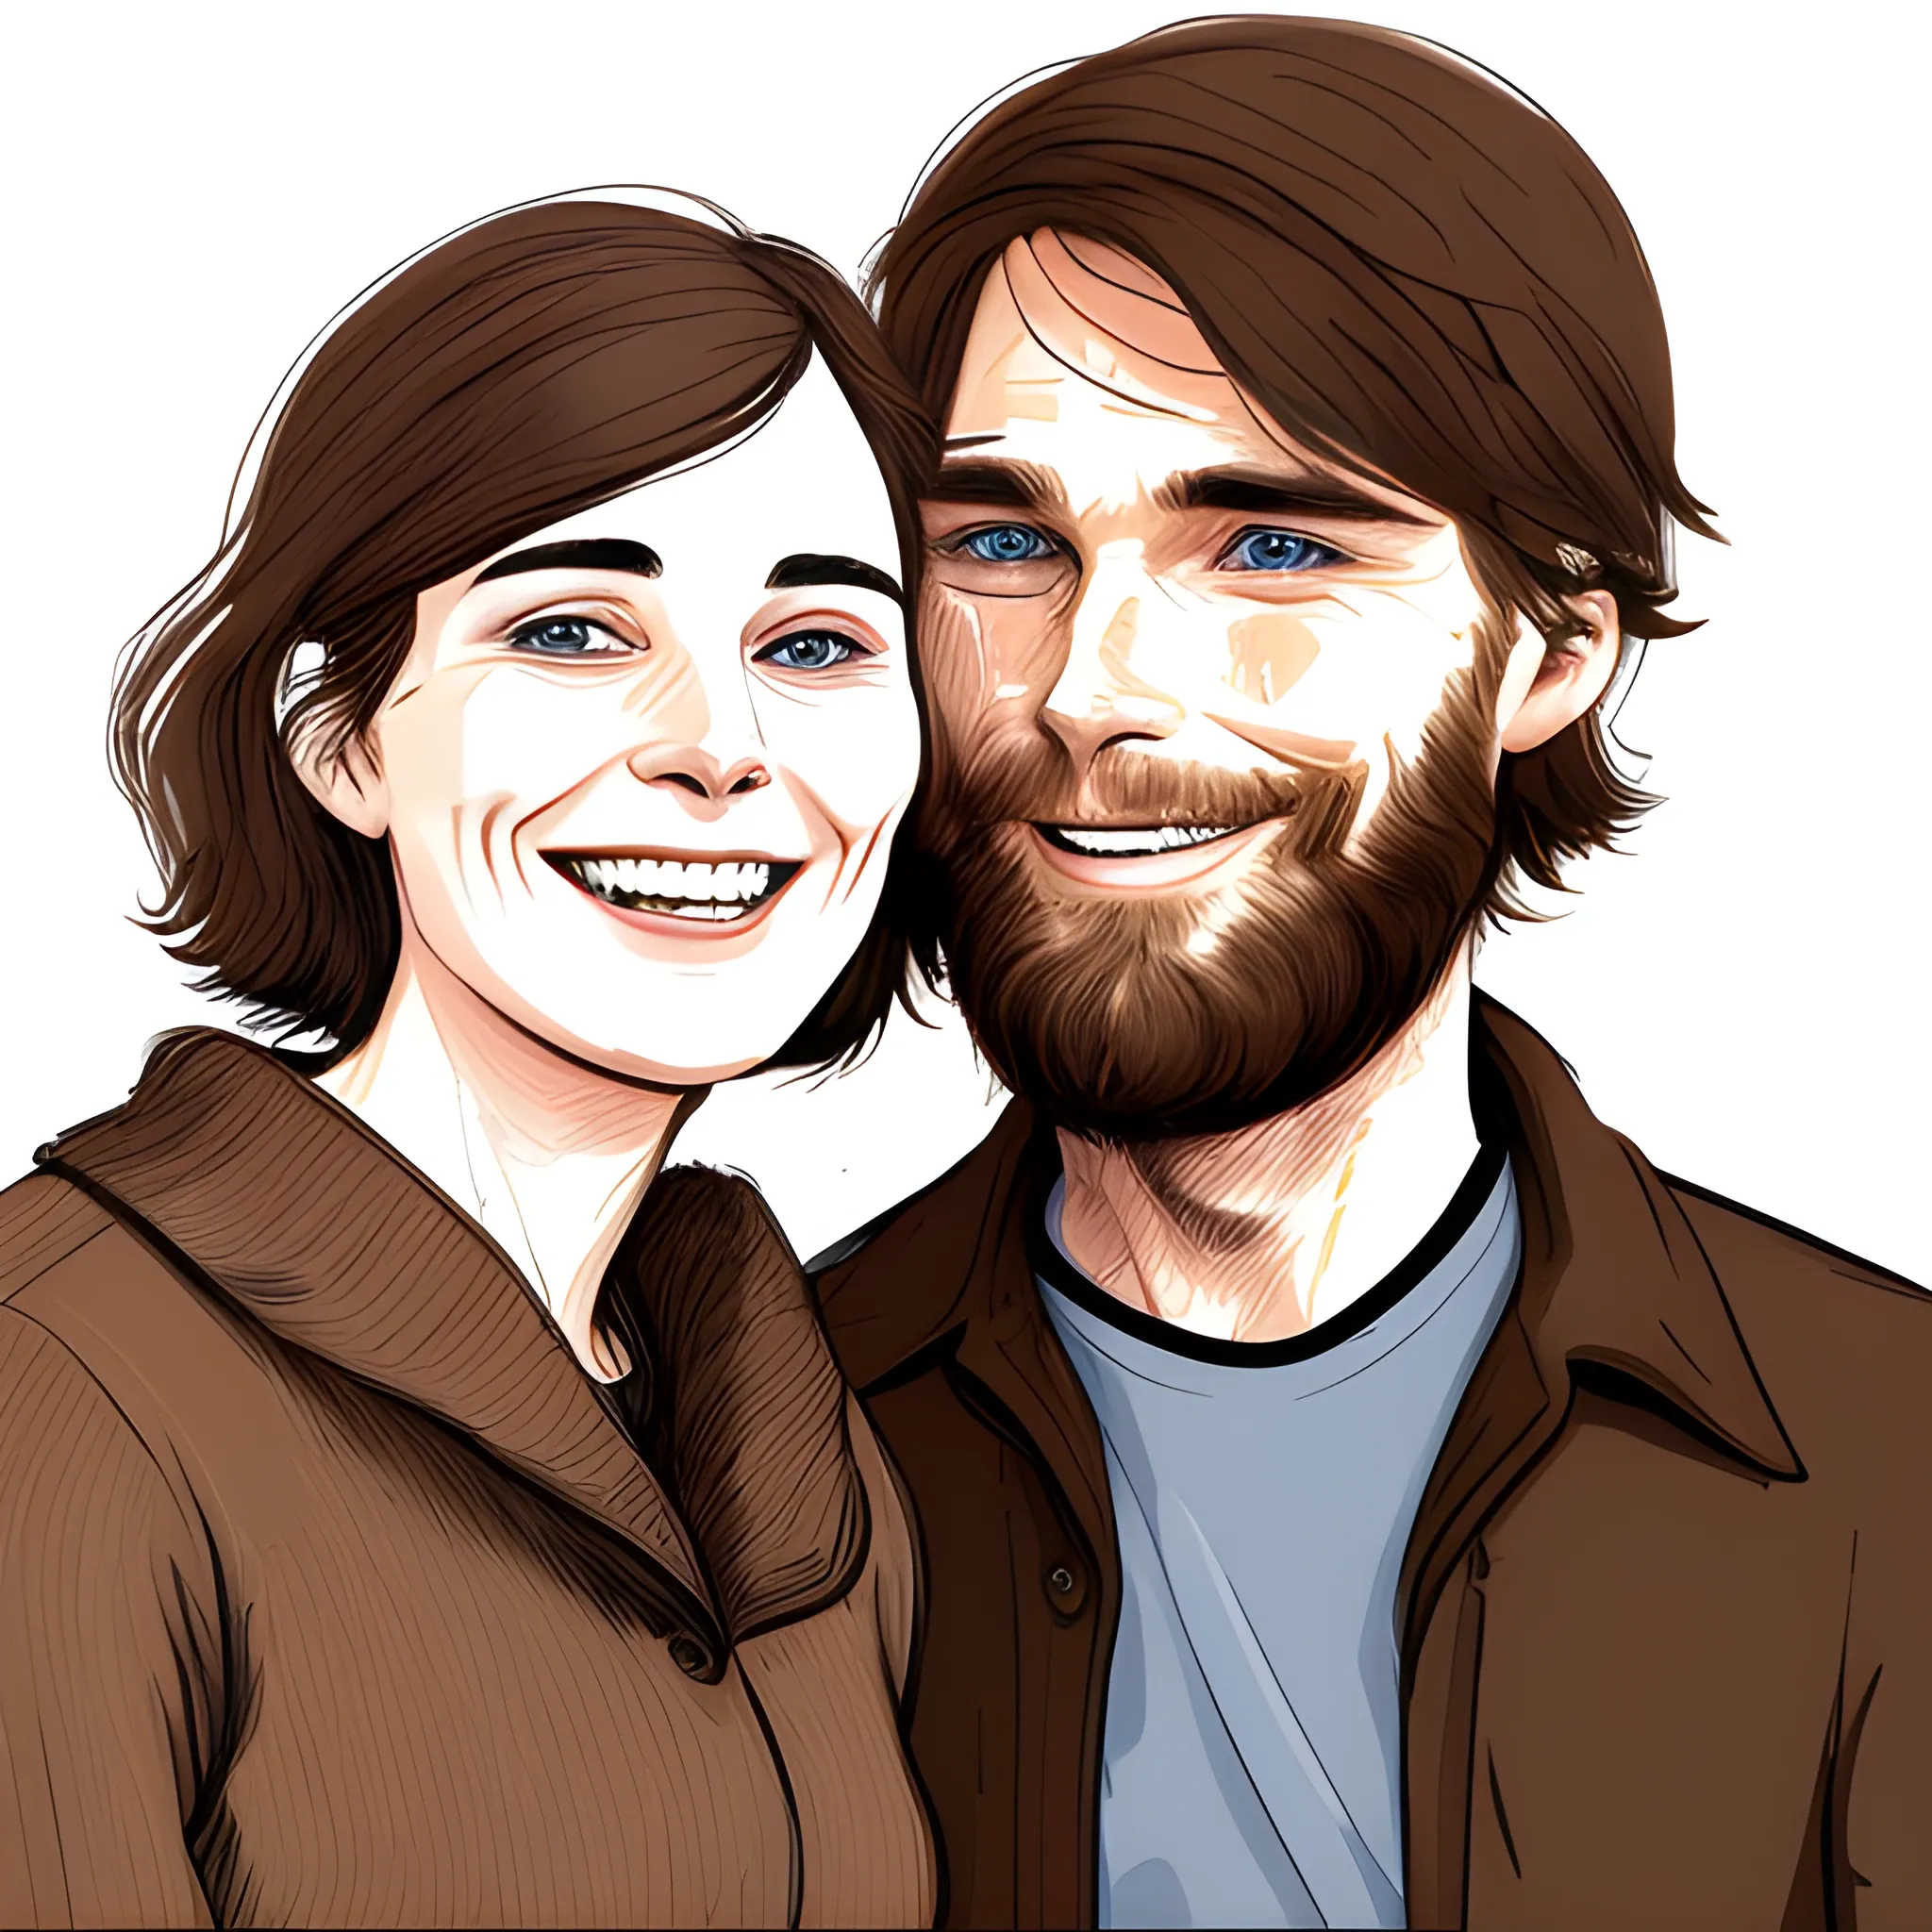 sketch style, cillian murphy with beard, happy, enthusiastic, about 45 years direct contact with the camera, drawing style, next to him a woman between 30 and 35 years old attached to him, the woman laughing enthusiastically, brown hair, upturned nose, old clothes